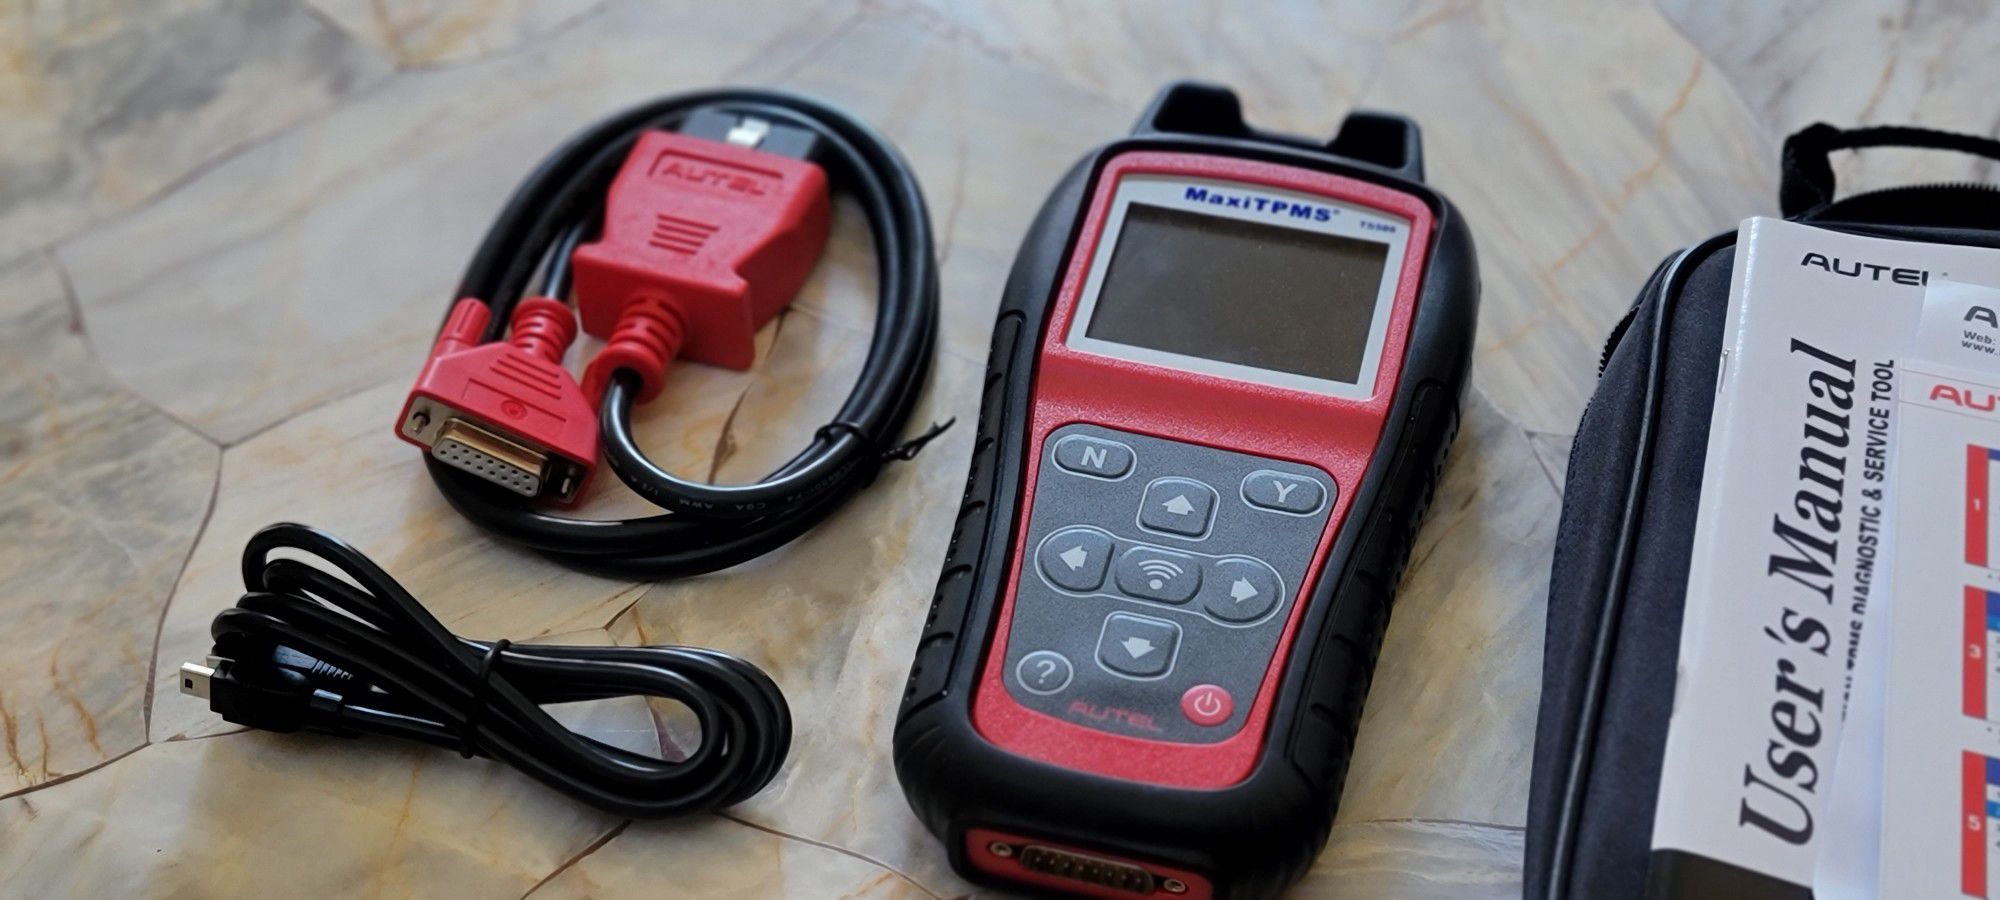 Autel TS508 TPMS Diagnostic Tool With Free Updates